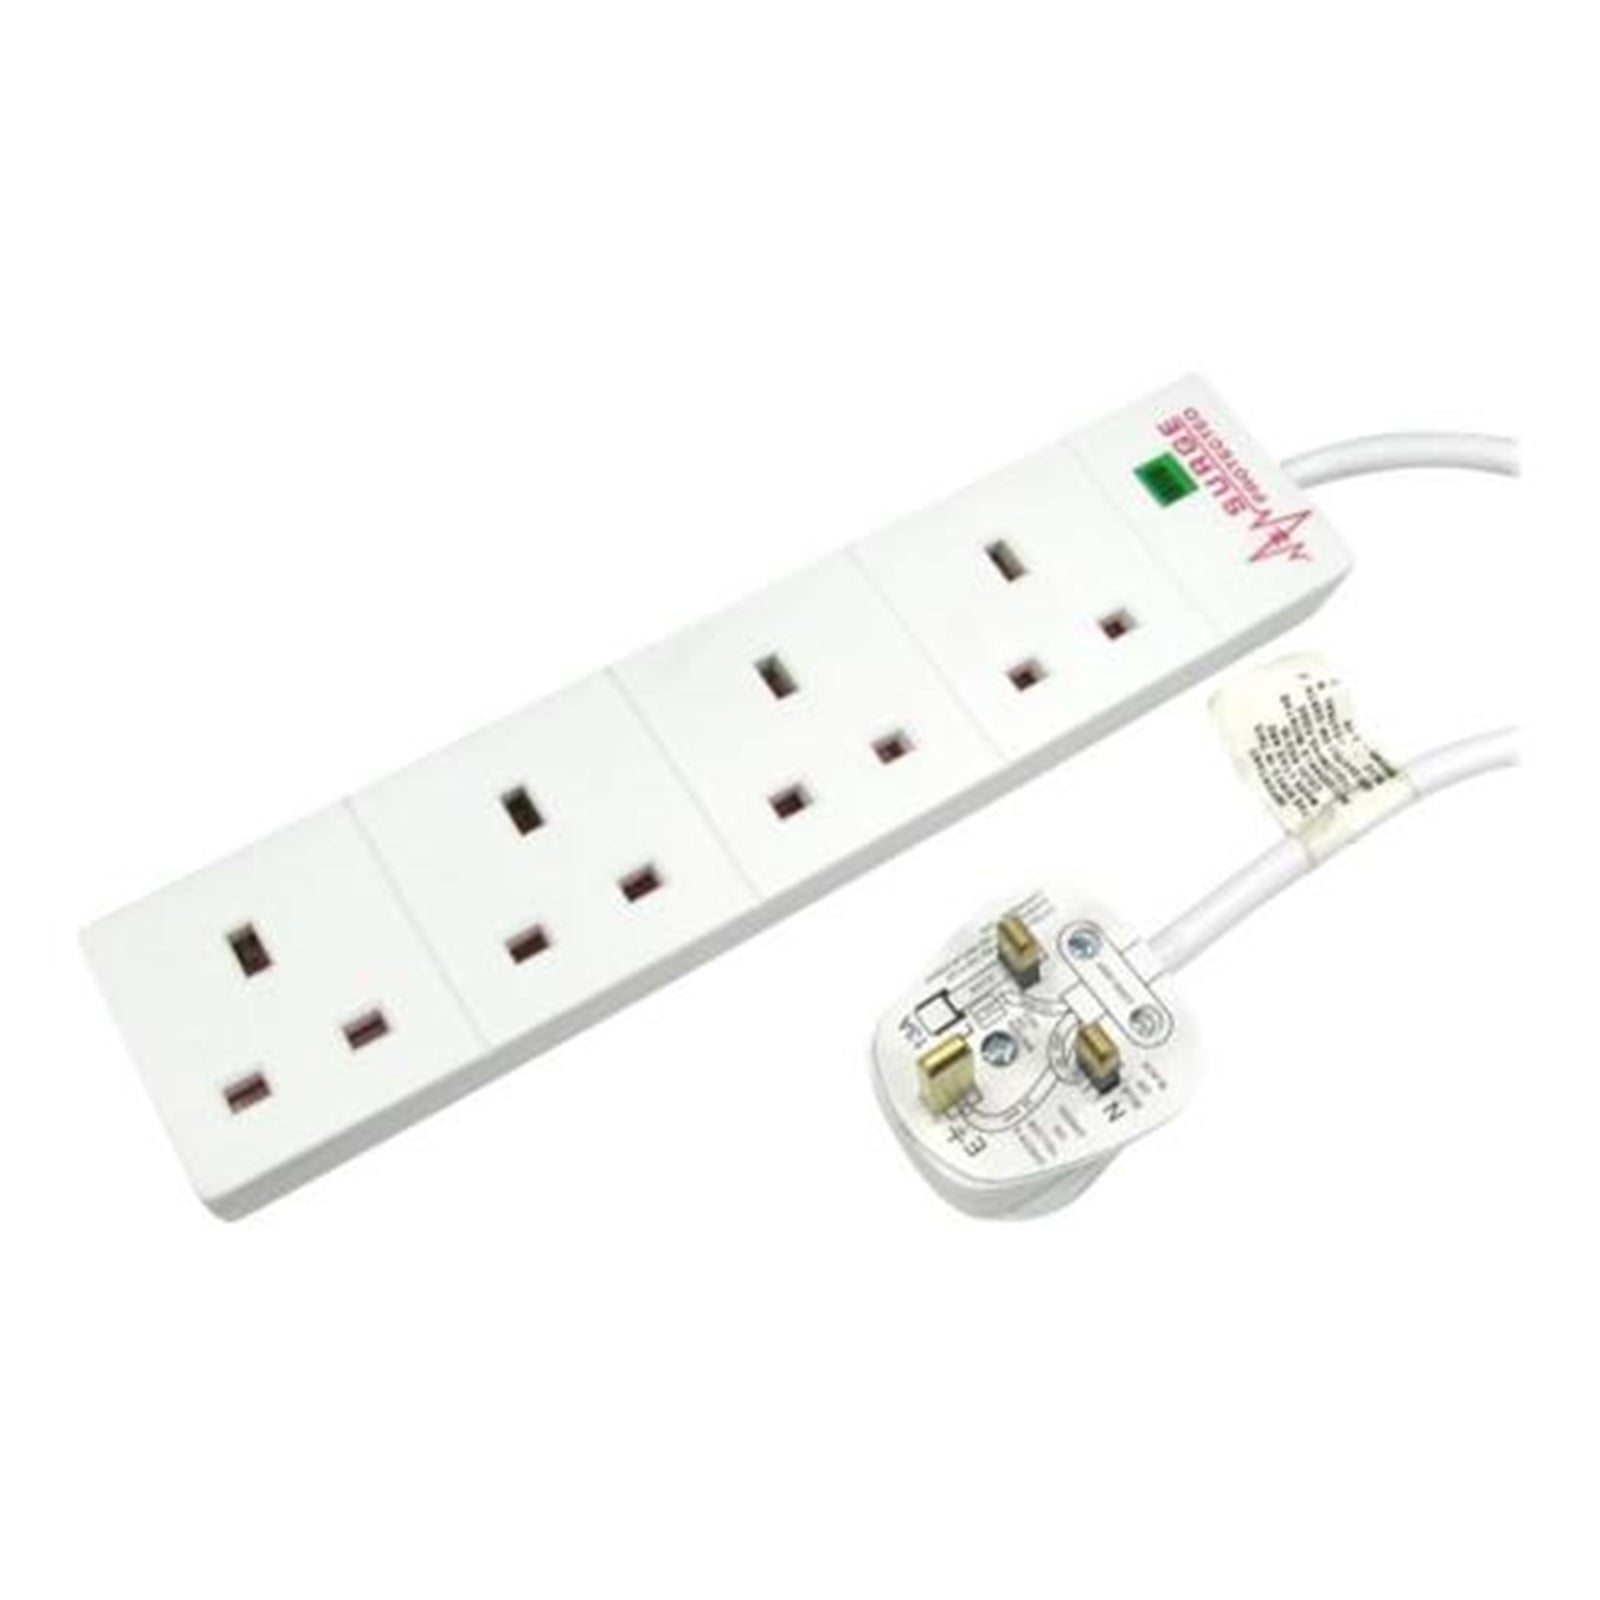 Extended Reach 4-Way Power Strip with 5m Cable and Safety Indicator